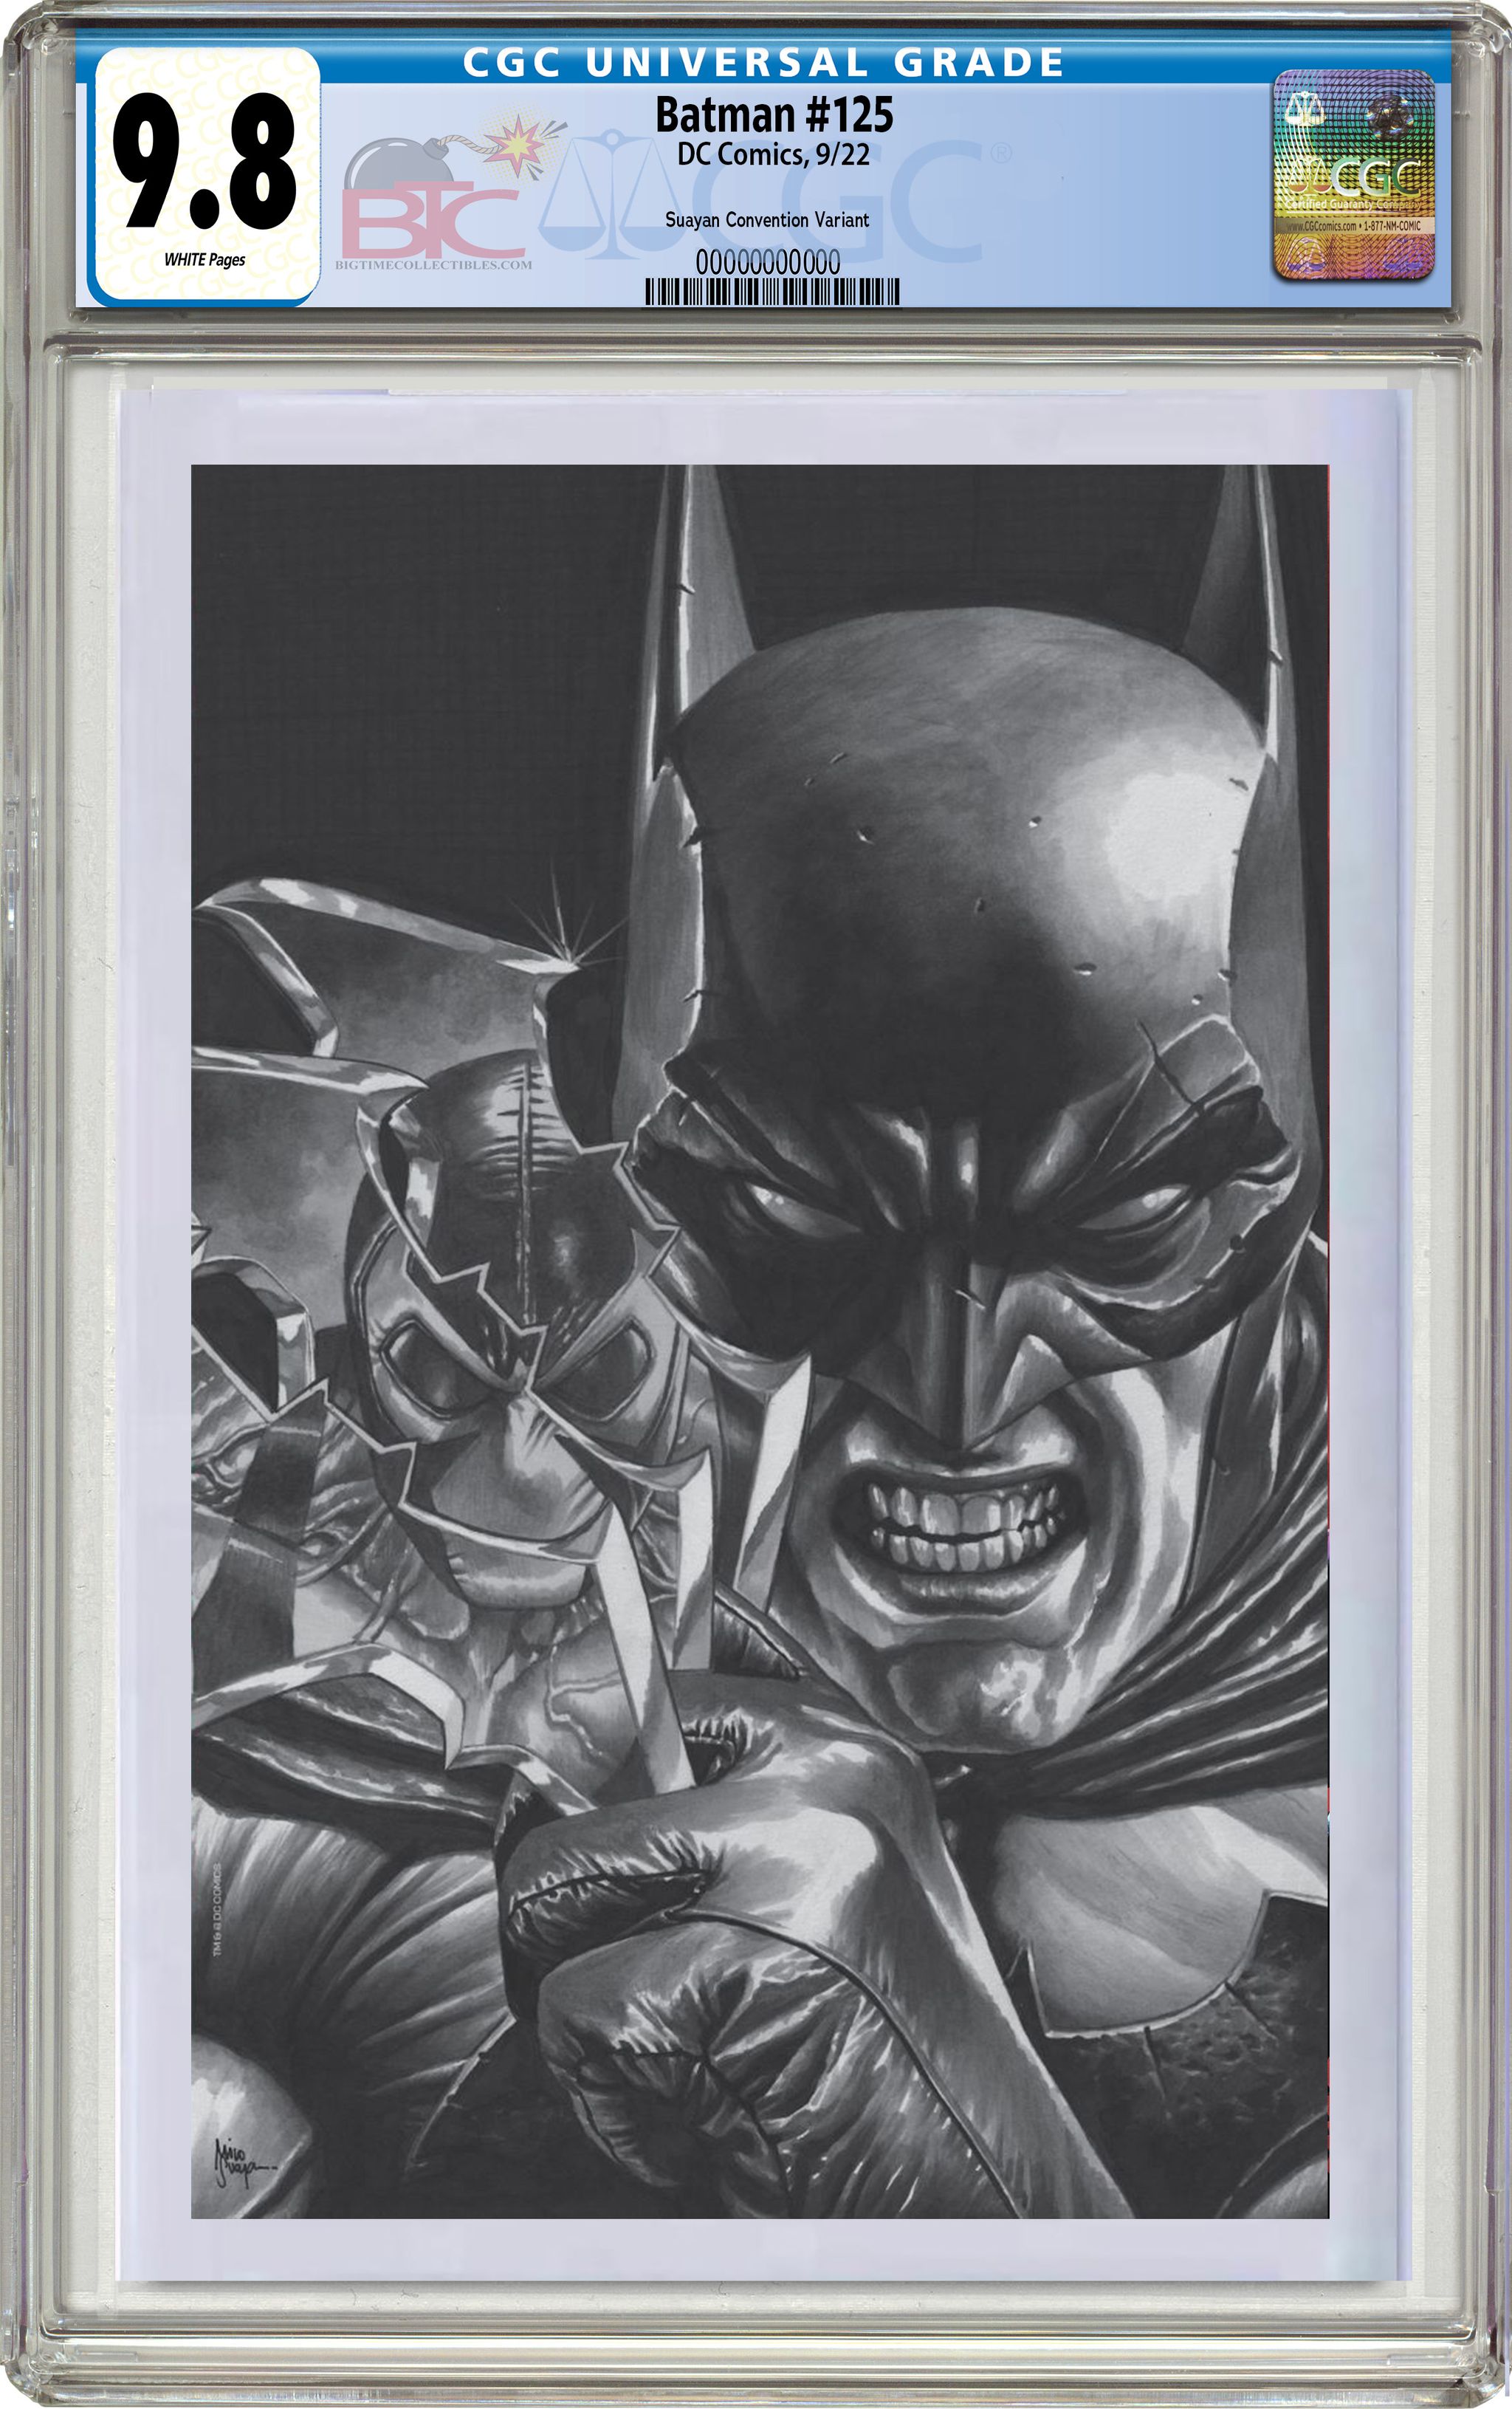 BATMAN #125 CONVENTION EXCLUSIVE & WHATNOT EXCLUSIVE VARIANT OPTIONS